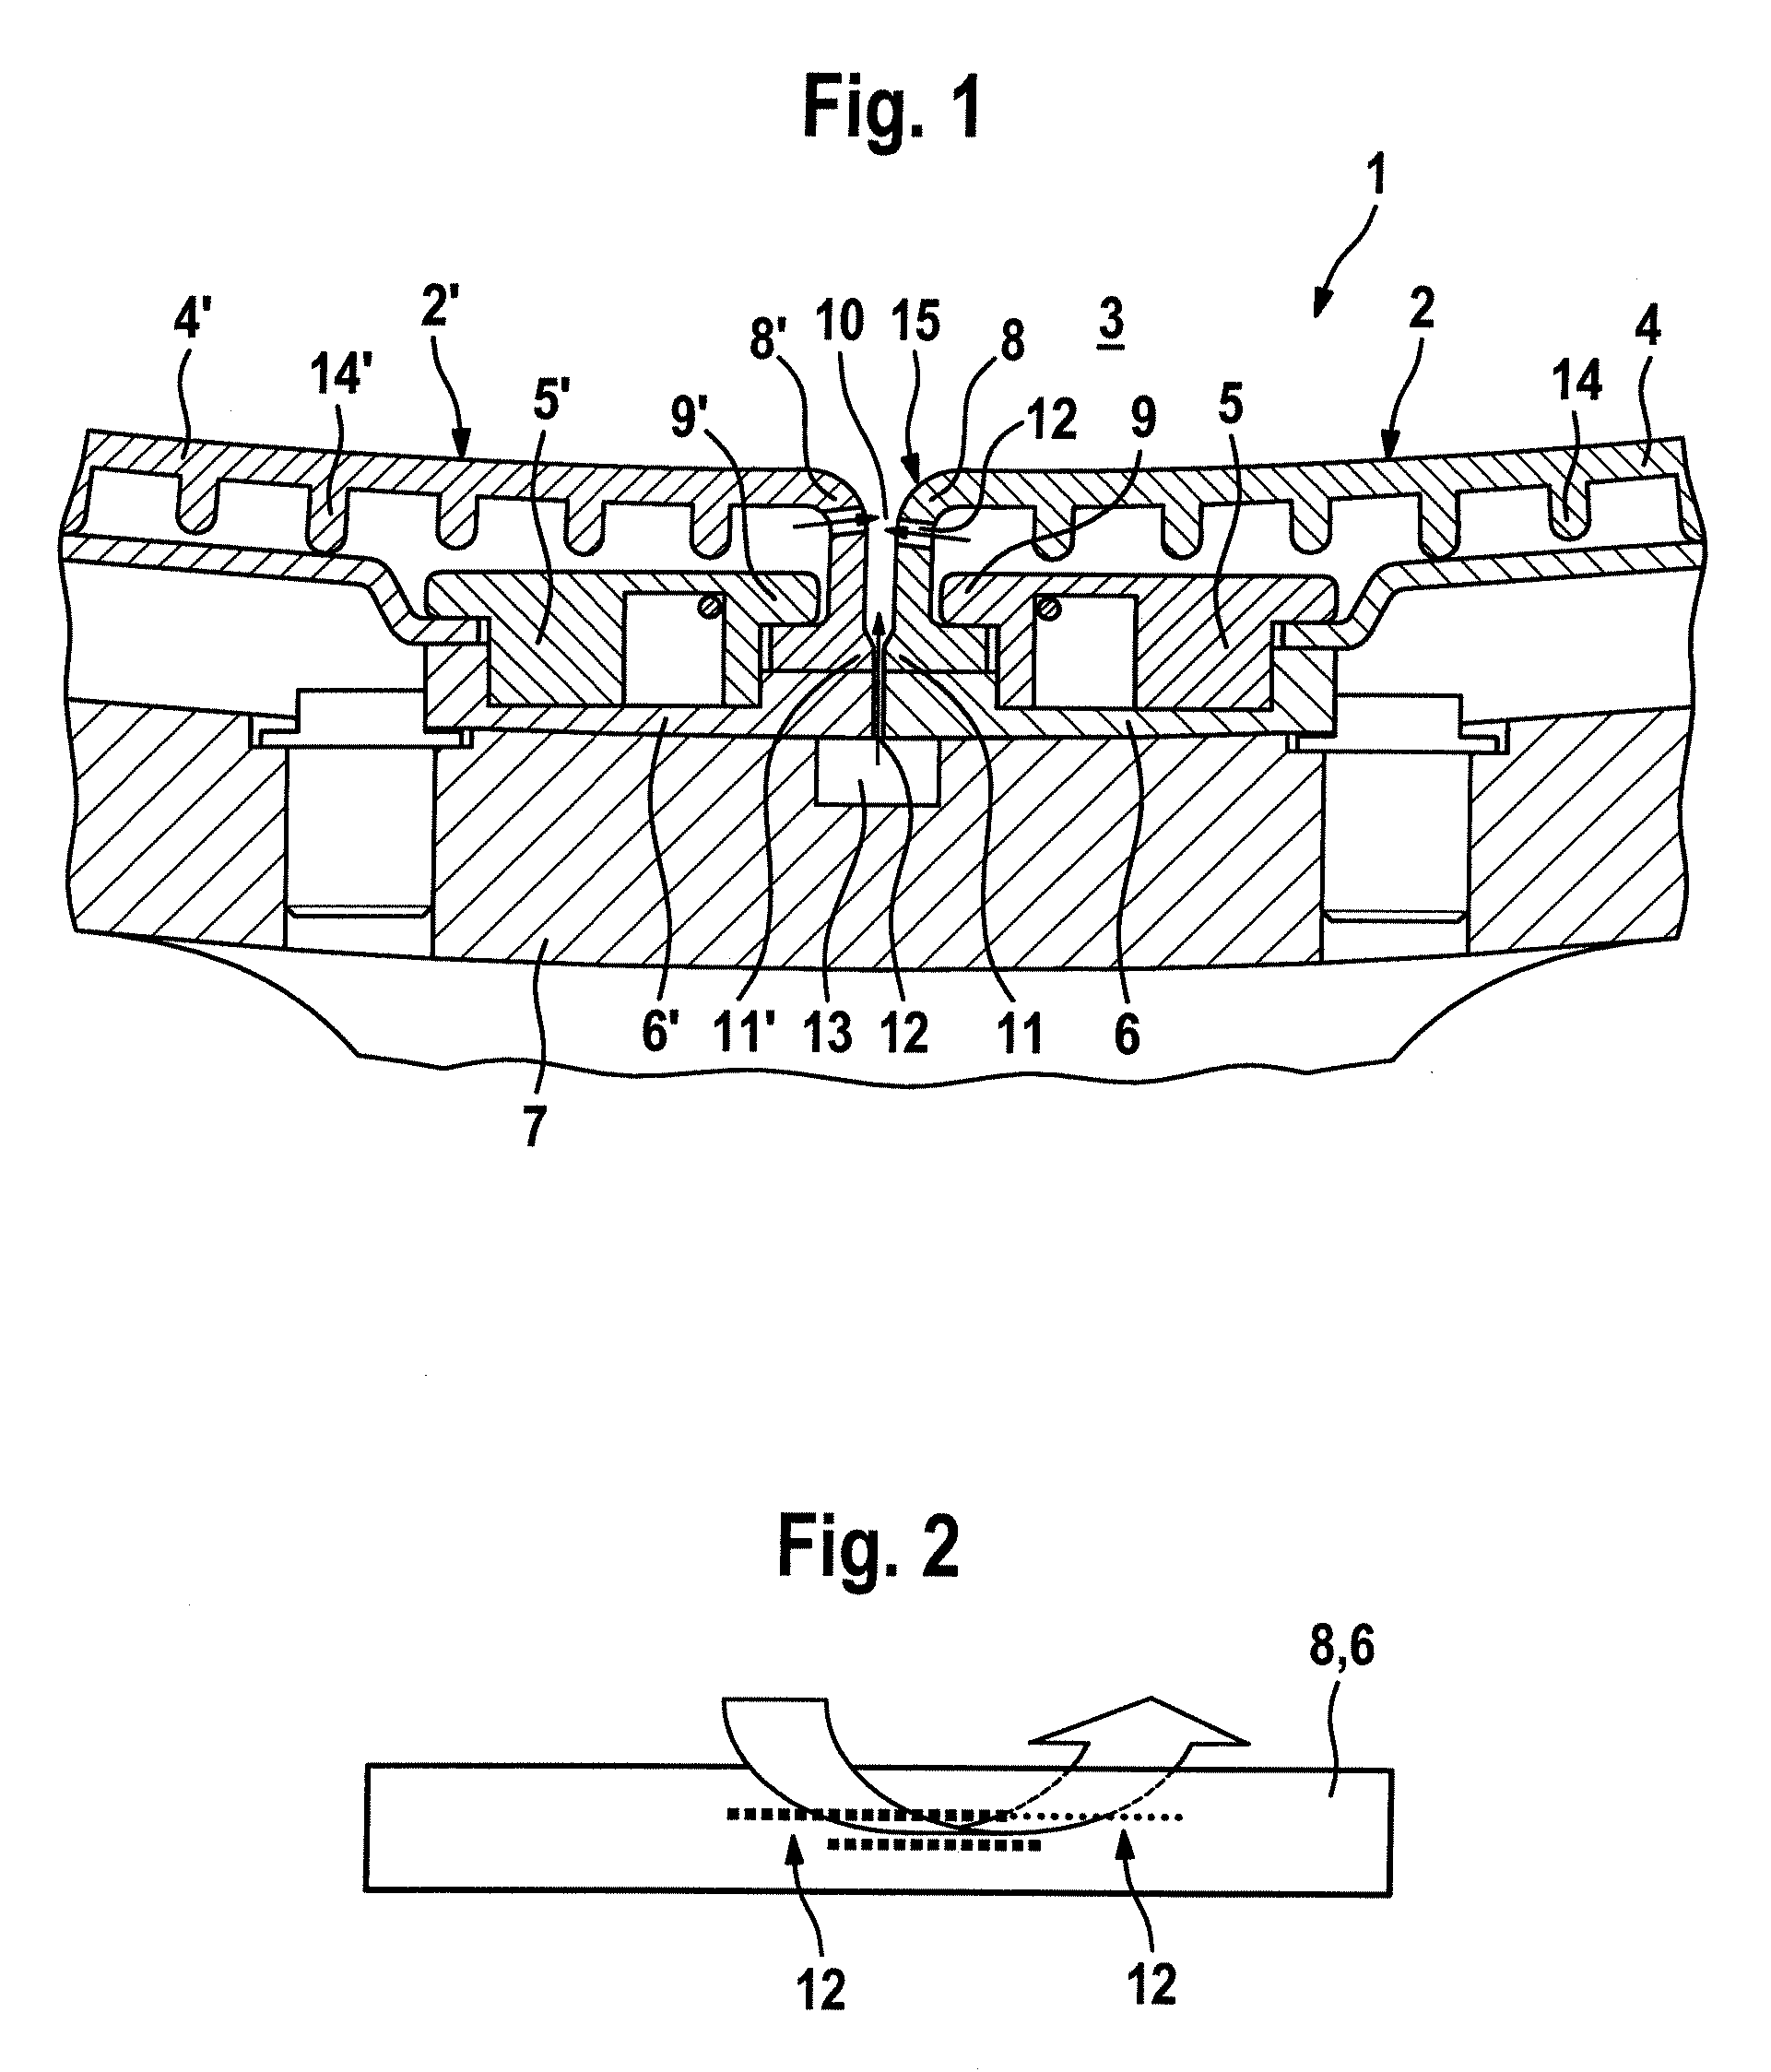 Combustion chamber of a combustion system